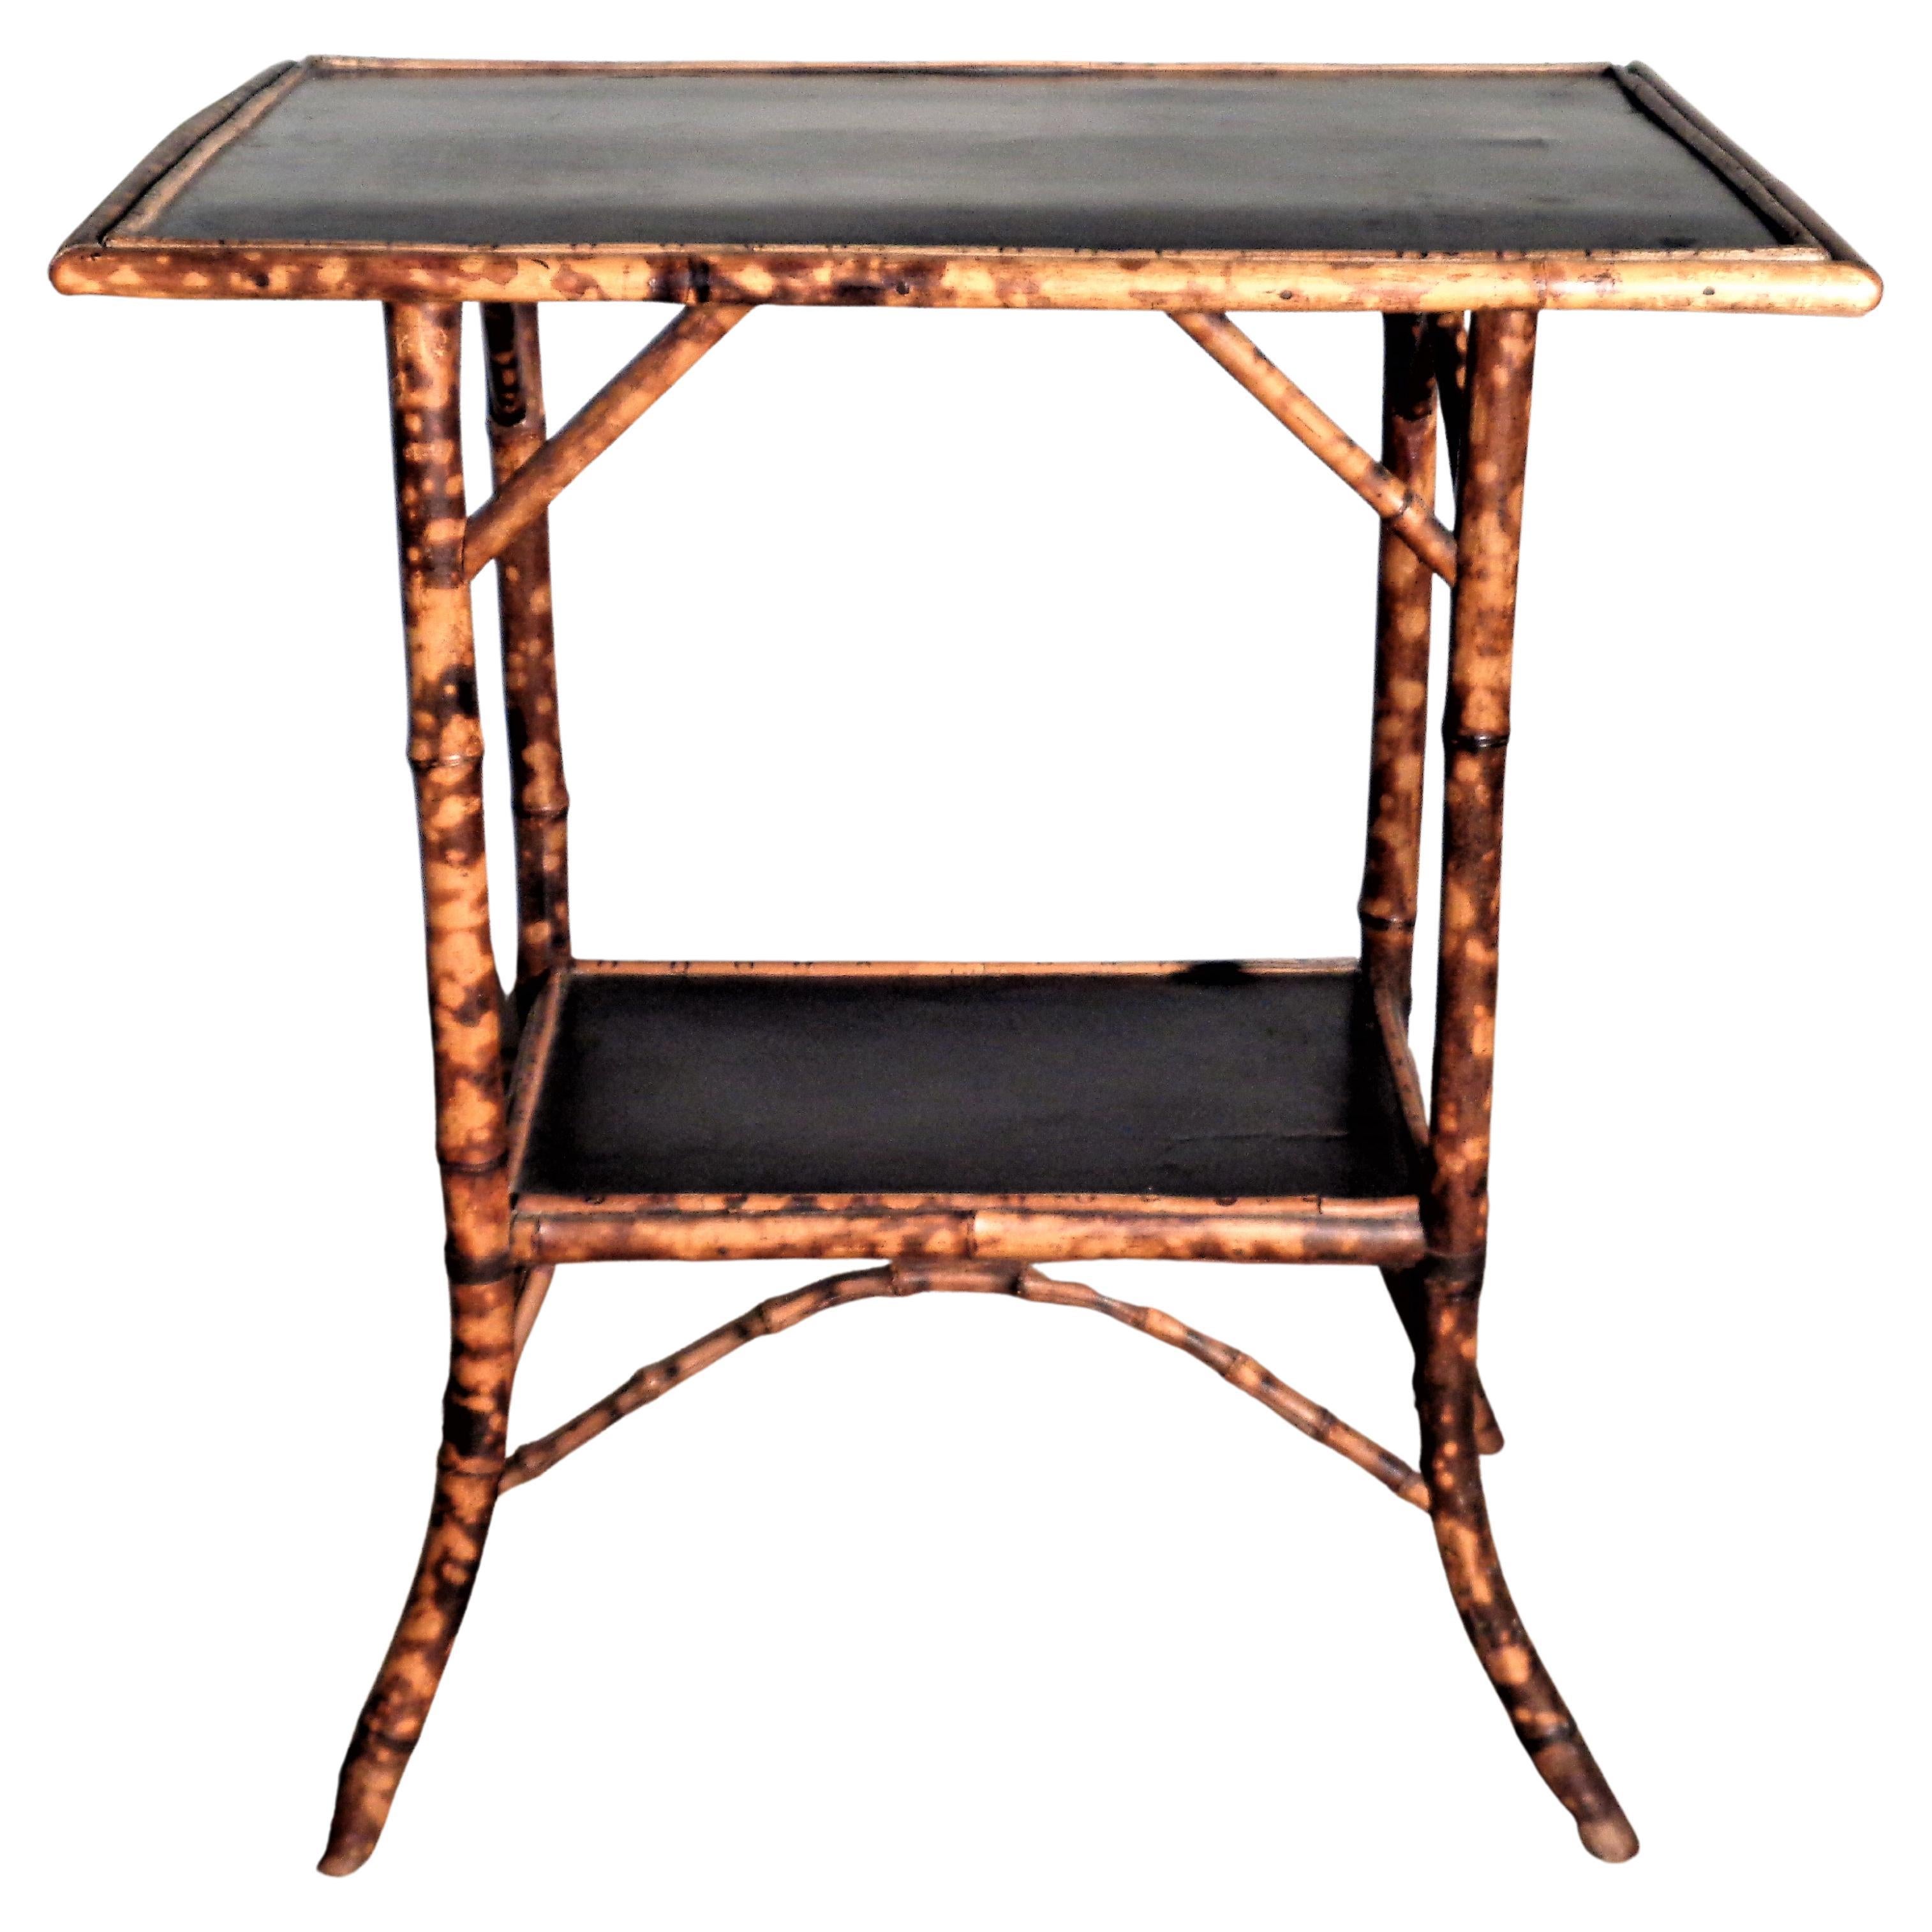 Burnt Bamboo Two Tier Japanned Table, Circa 1900